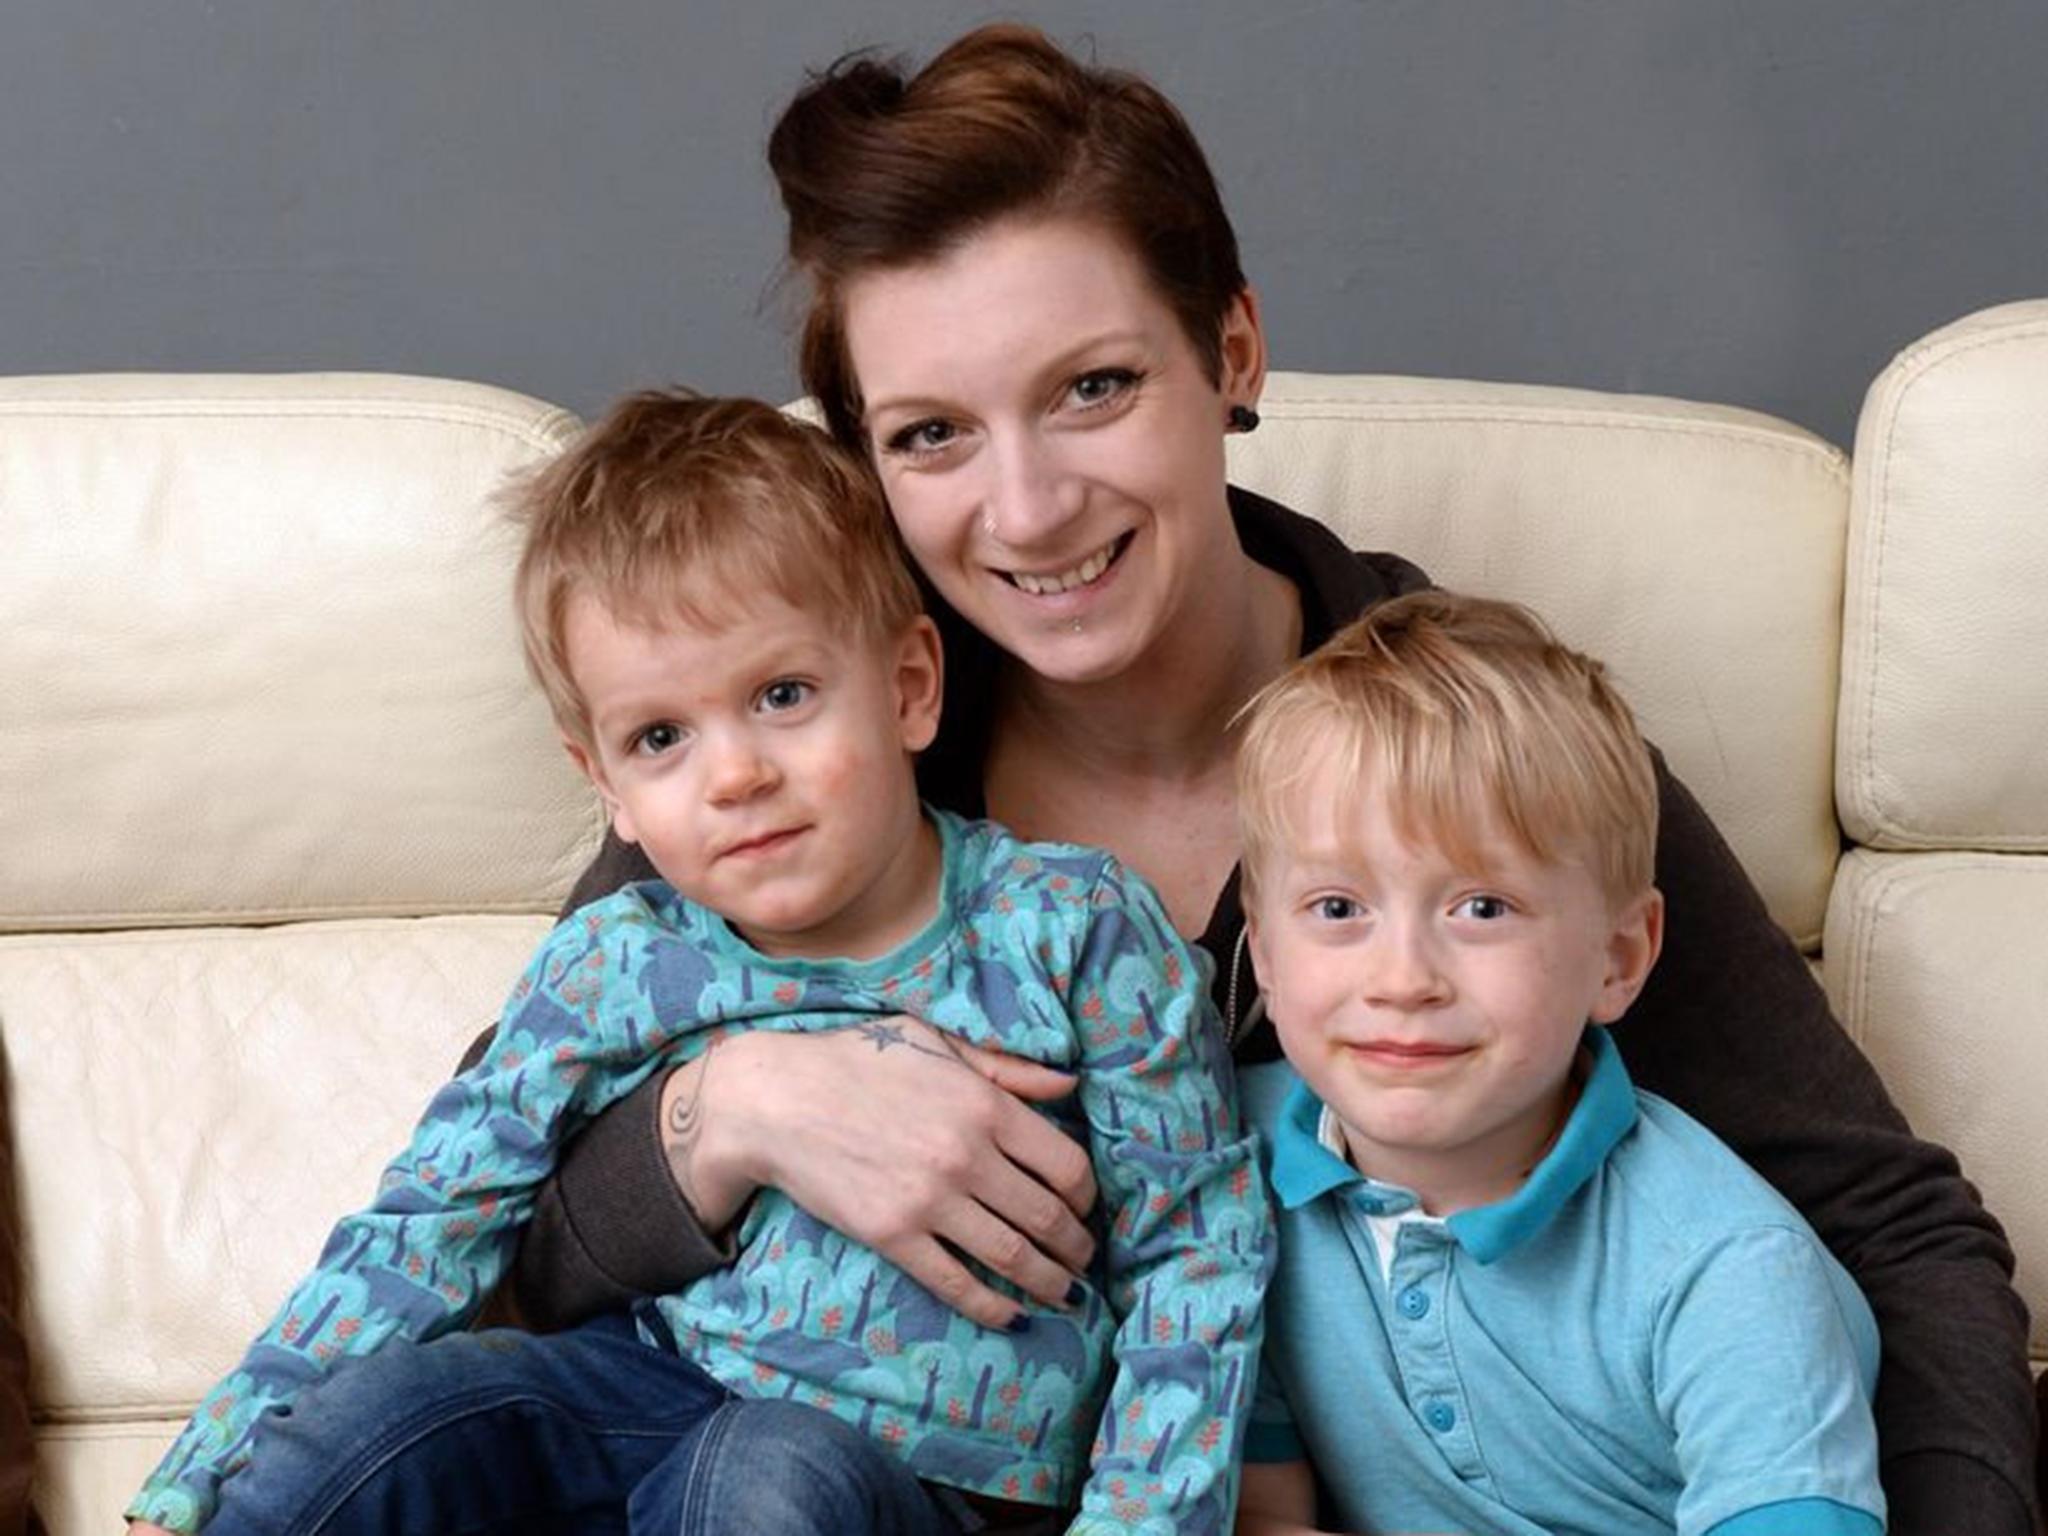 Jodi Dowse and her two sons, Taylan (right) and Farren (left)